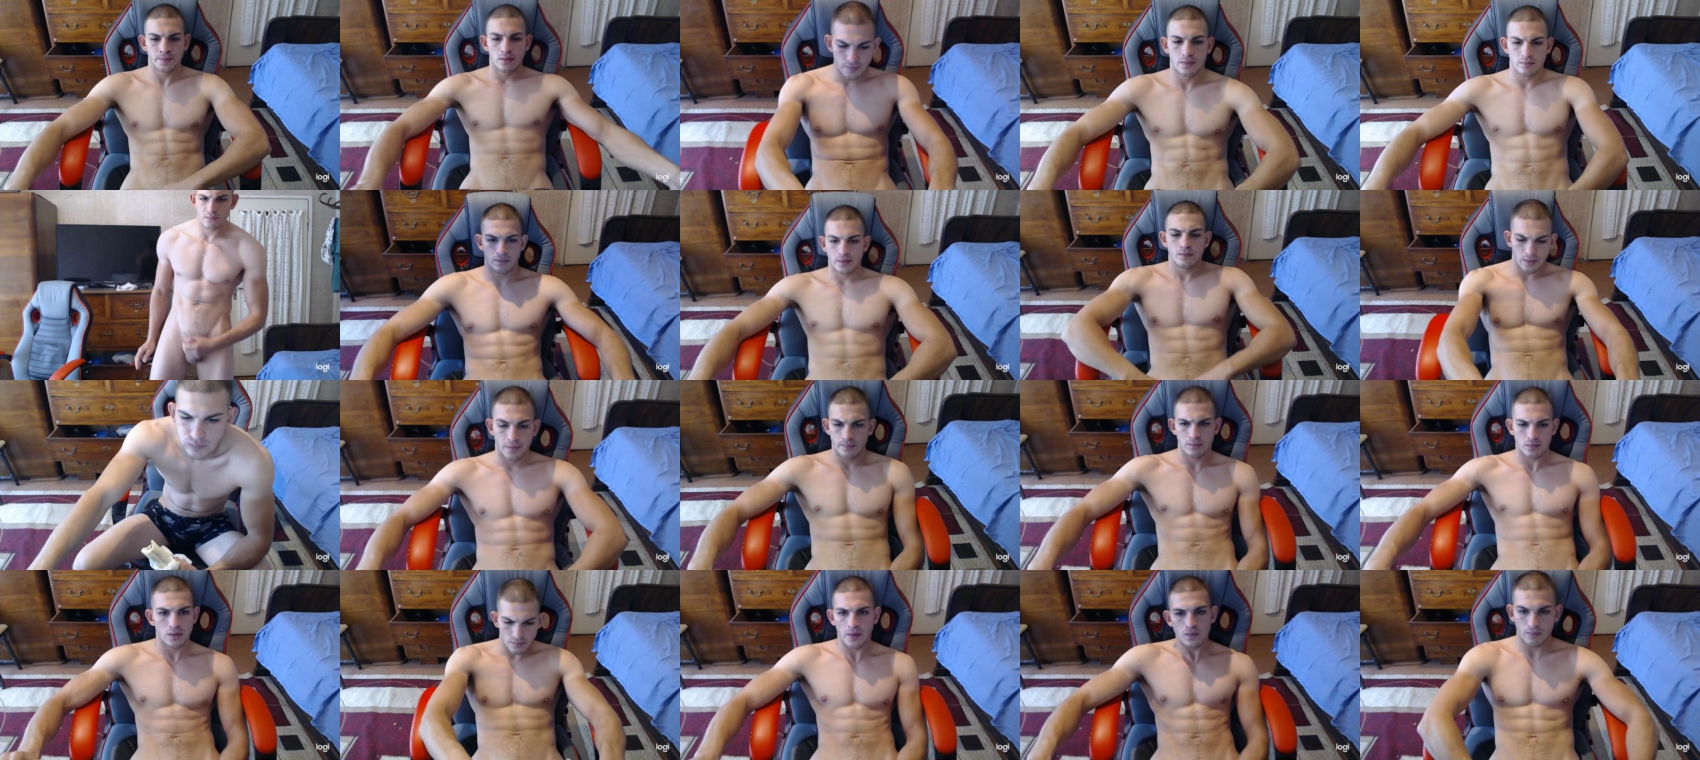 musclesexygod legs CAM SHOW @ Chaturbate 25-09-2022